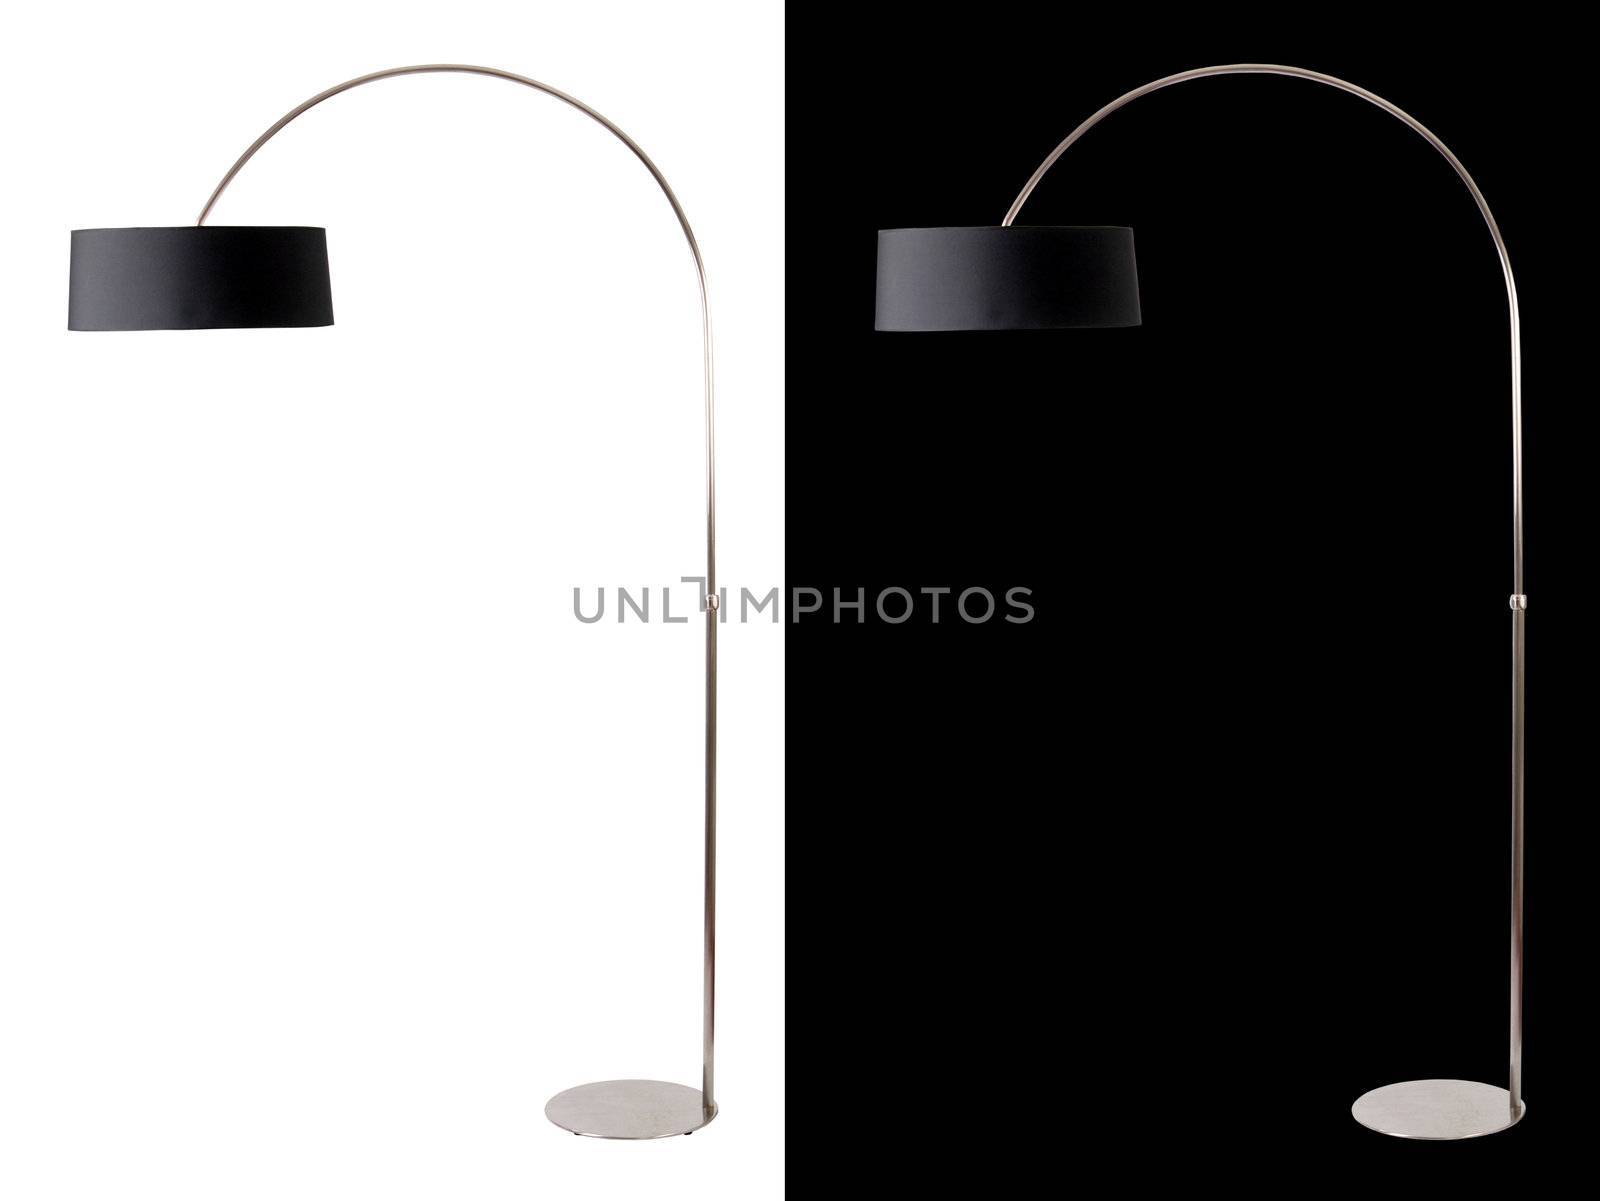 Contemporary metallic and black floor lamp on white and black backgrounds. Clipping path included for both, so you can easily cut it out and place over the top of a design.